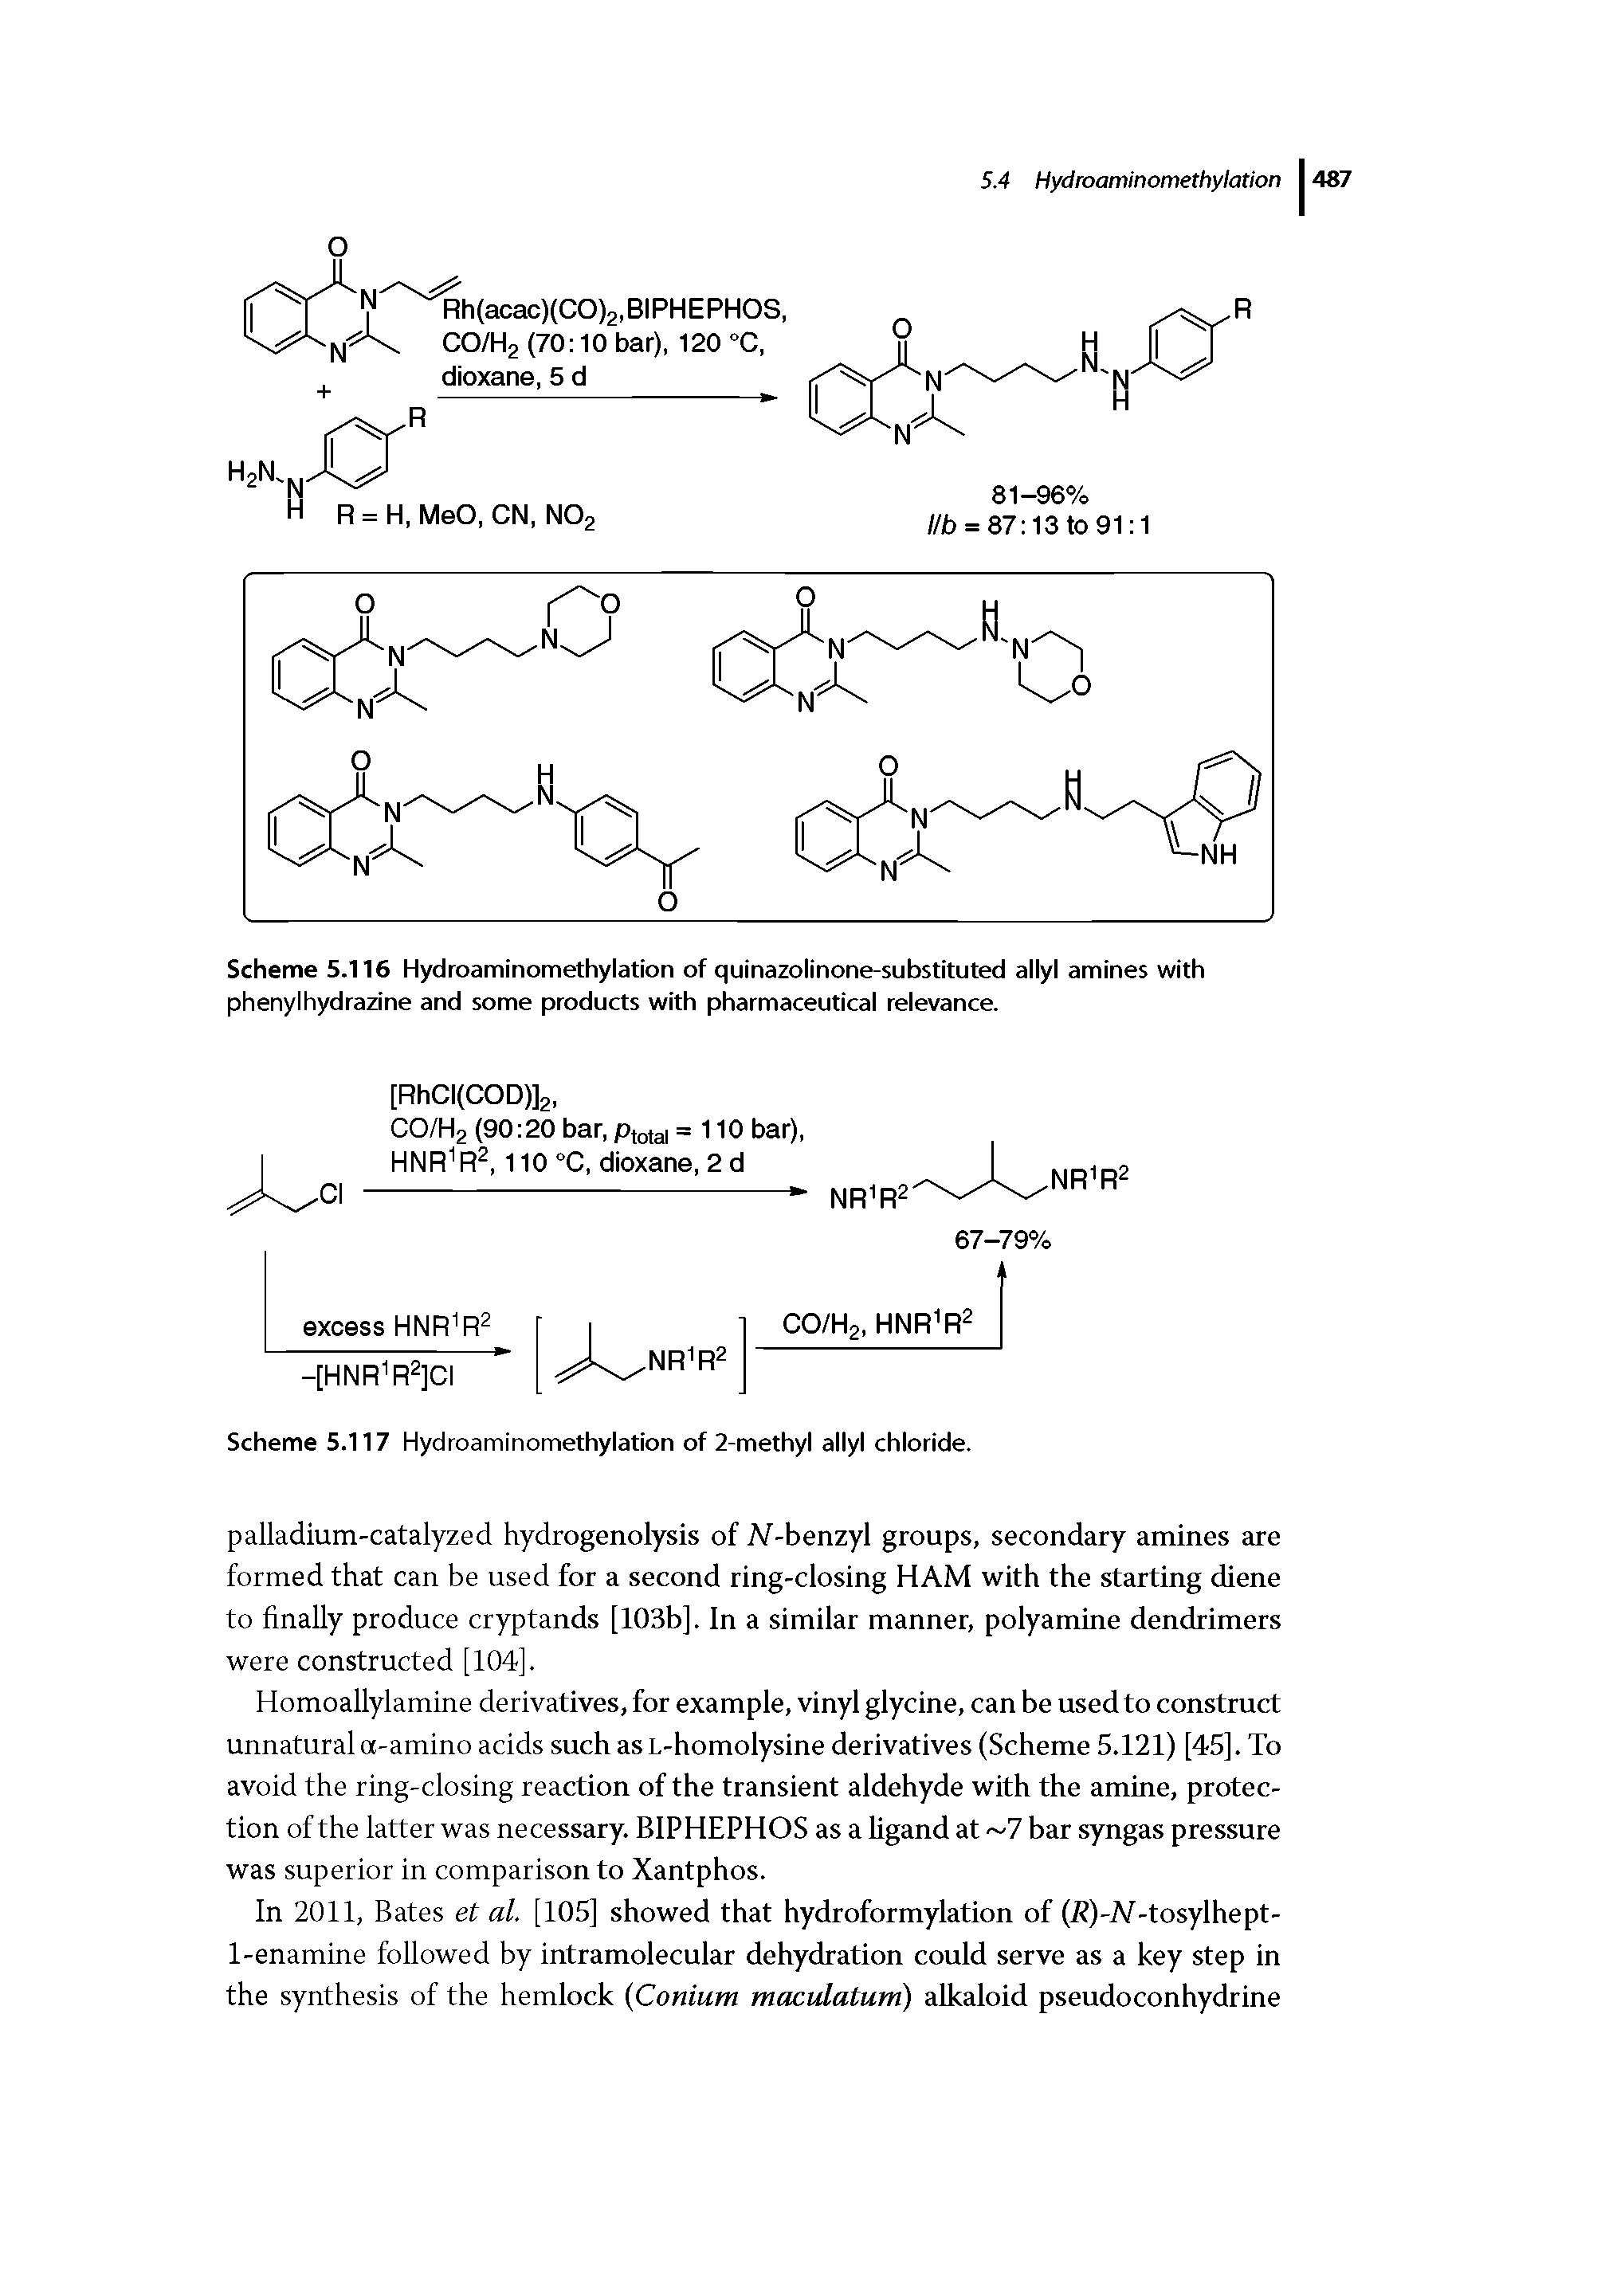 Scheme 5.116 Hydroaminomethylation of quinazolinone-substituted allyl amines with phenylhydrazine and some products with pharmaceutical relevance.